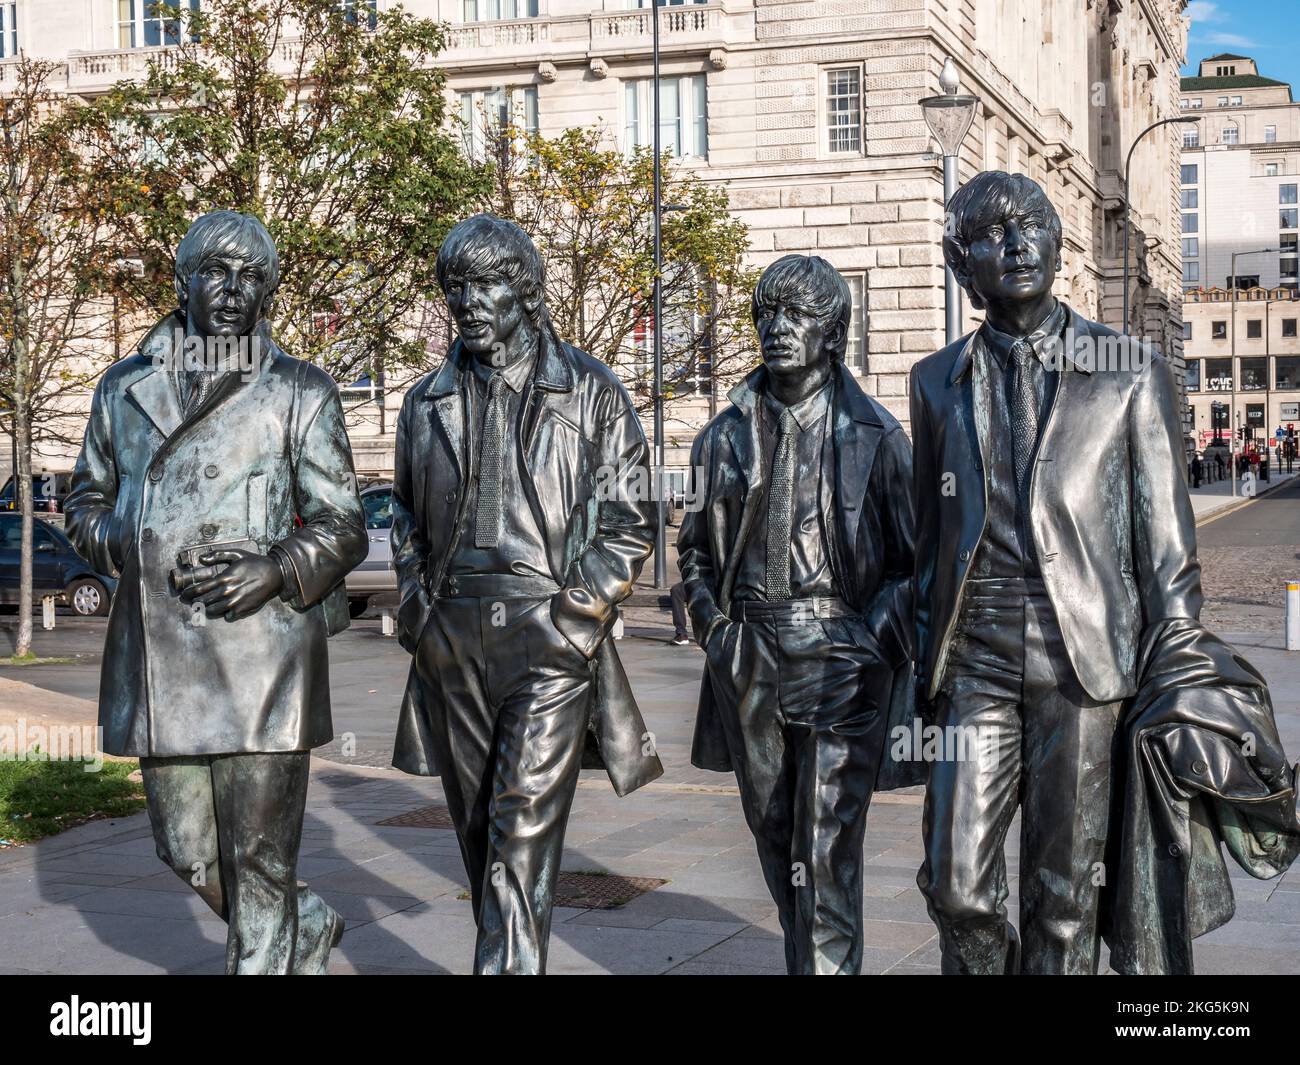 Street scene in Liverpool with the bronze statues of the famous Beatles pop group, with Paul McCartney, George Harrison, Ringo Starr, John Lennon Stock Photo